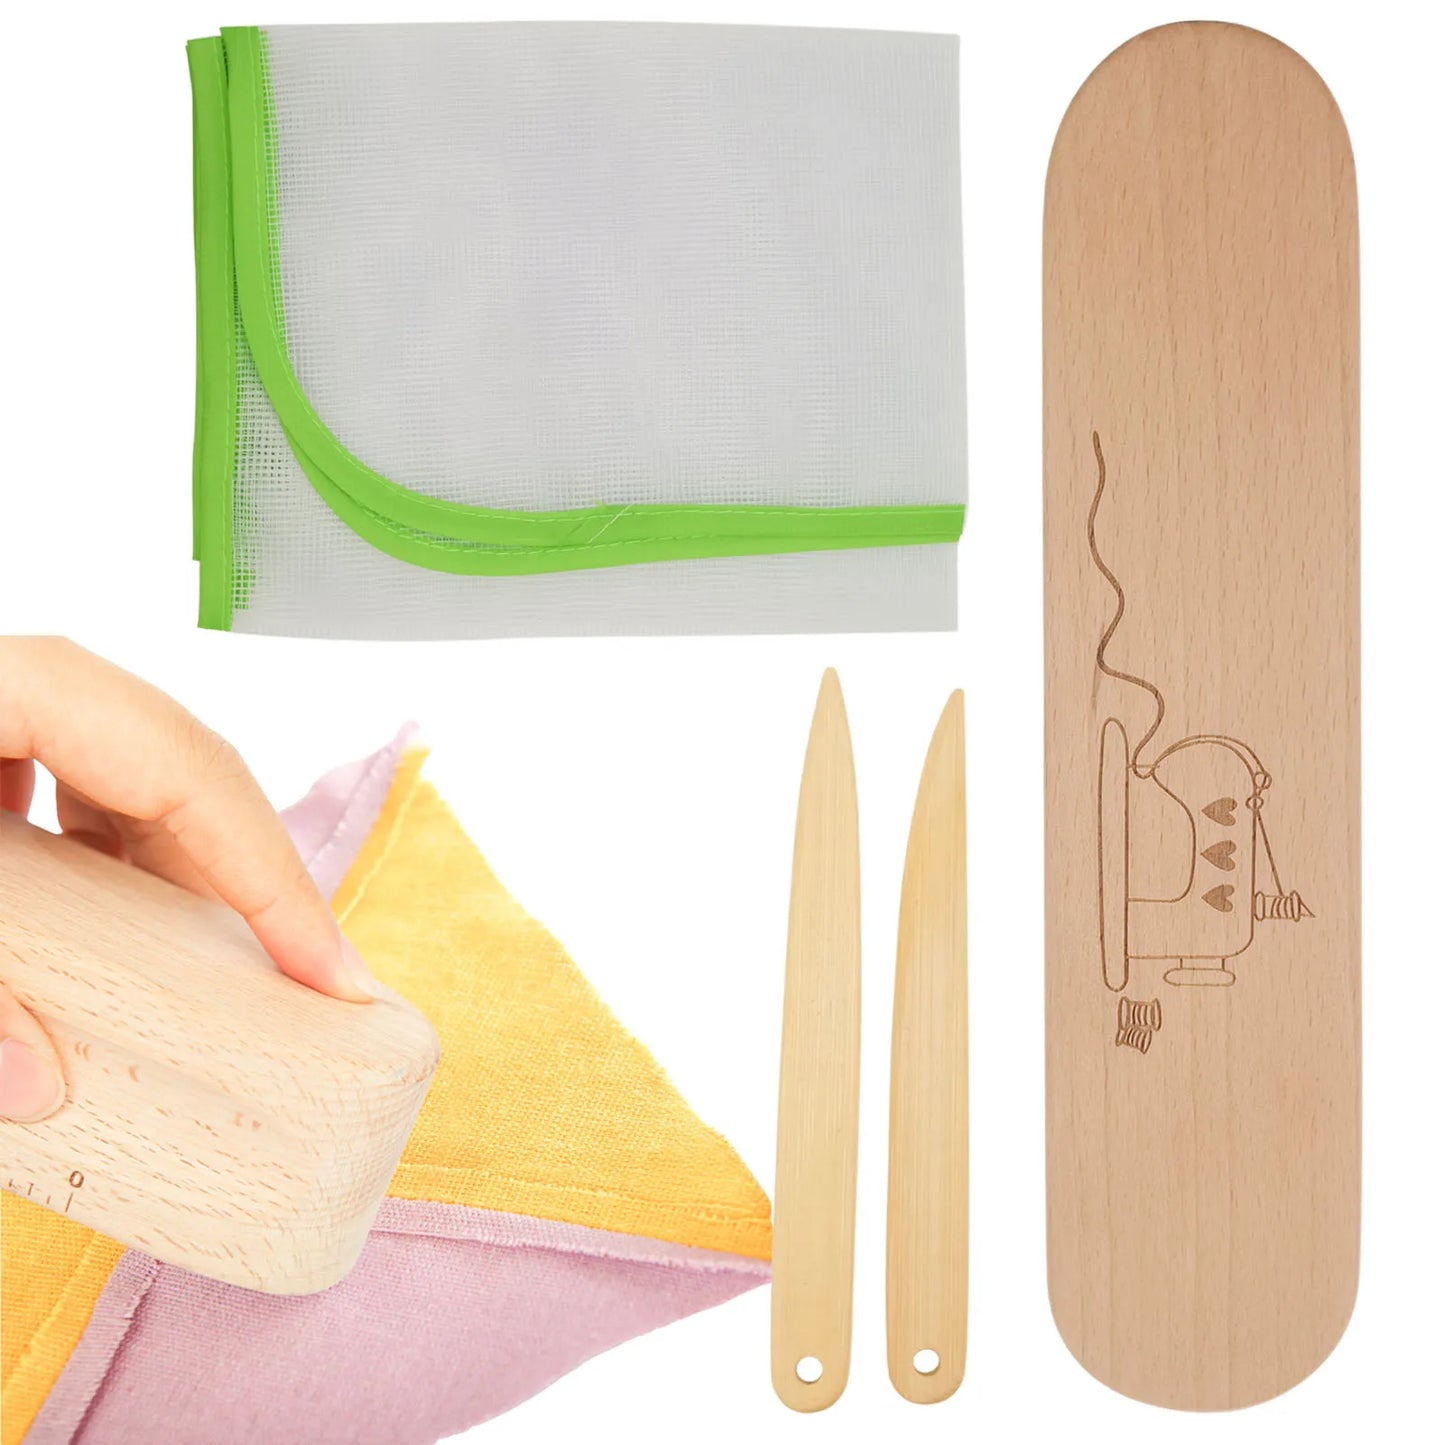 Wood Tailors Clapper Multi-Purpose Sewing Tool For Flattening